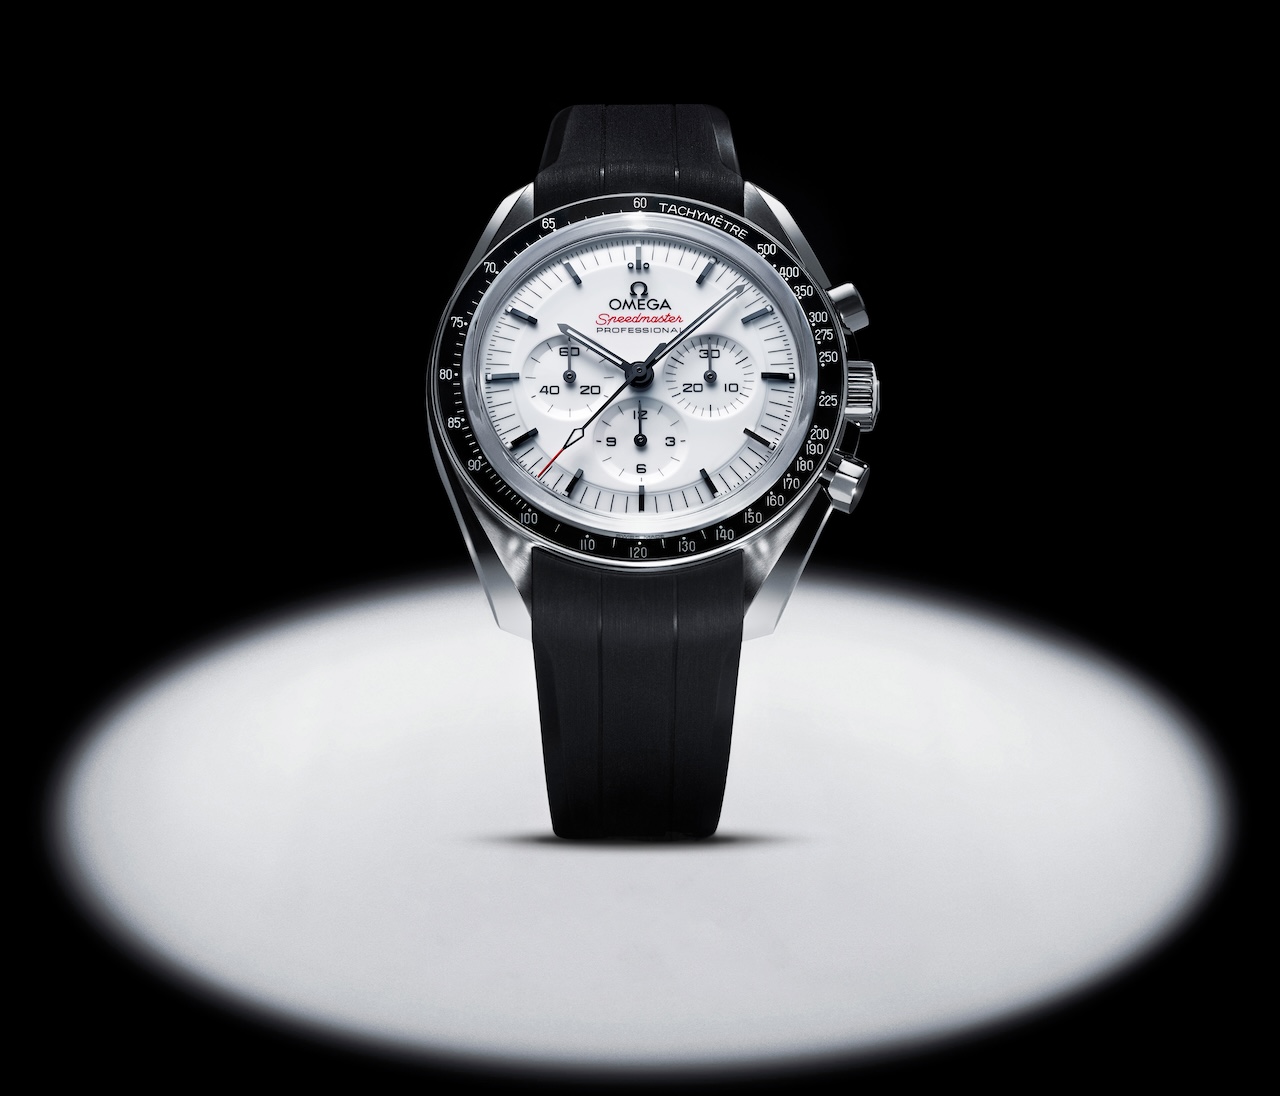 Omega has added to its most popular chronograph lineup with the arrival of the Omega Speedmaster Moonwatch in lacquered white.